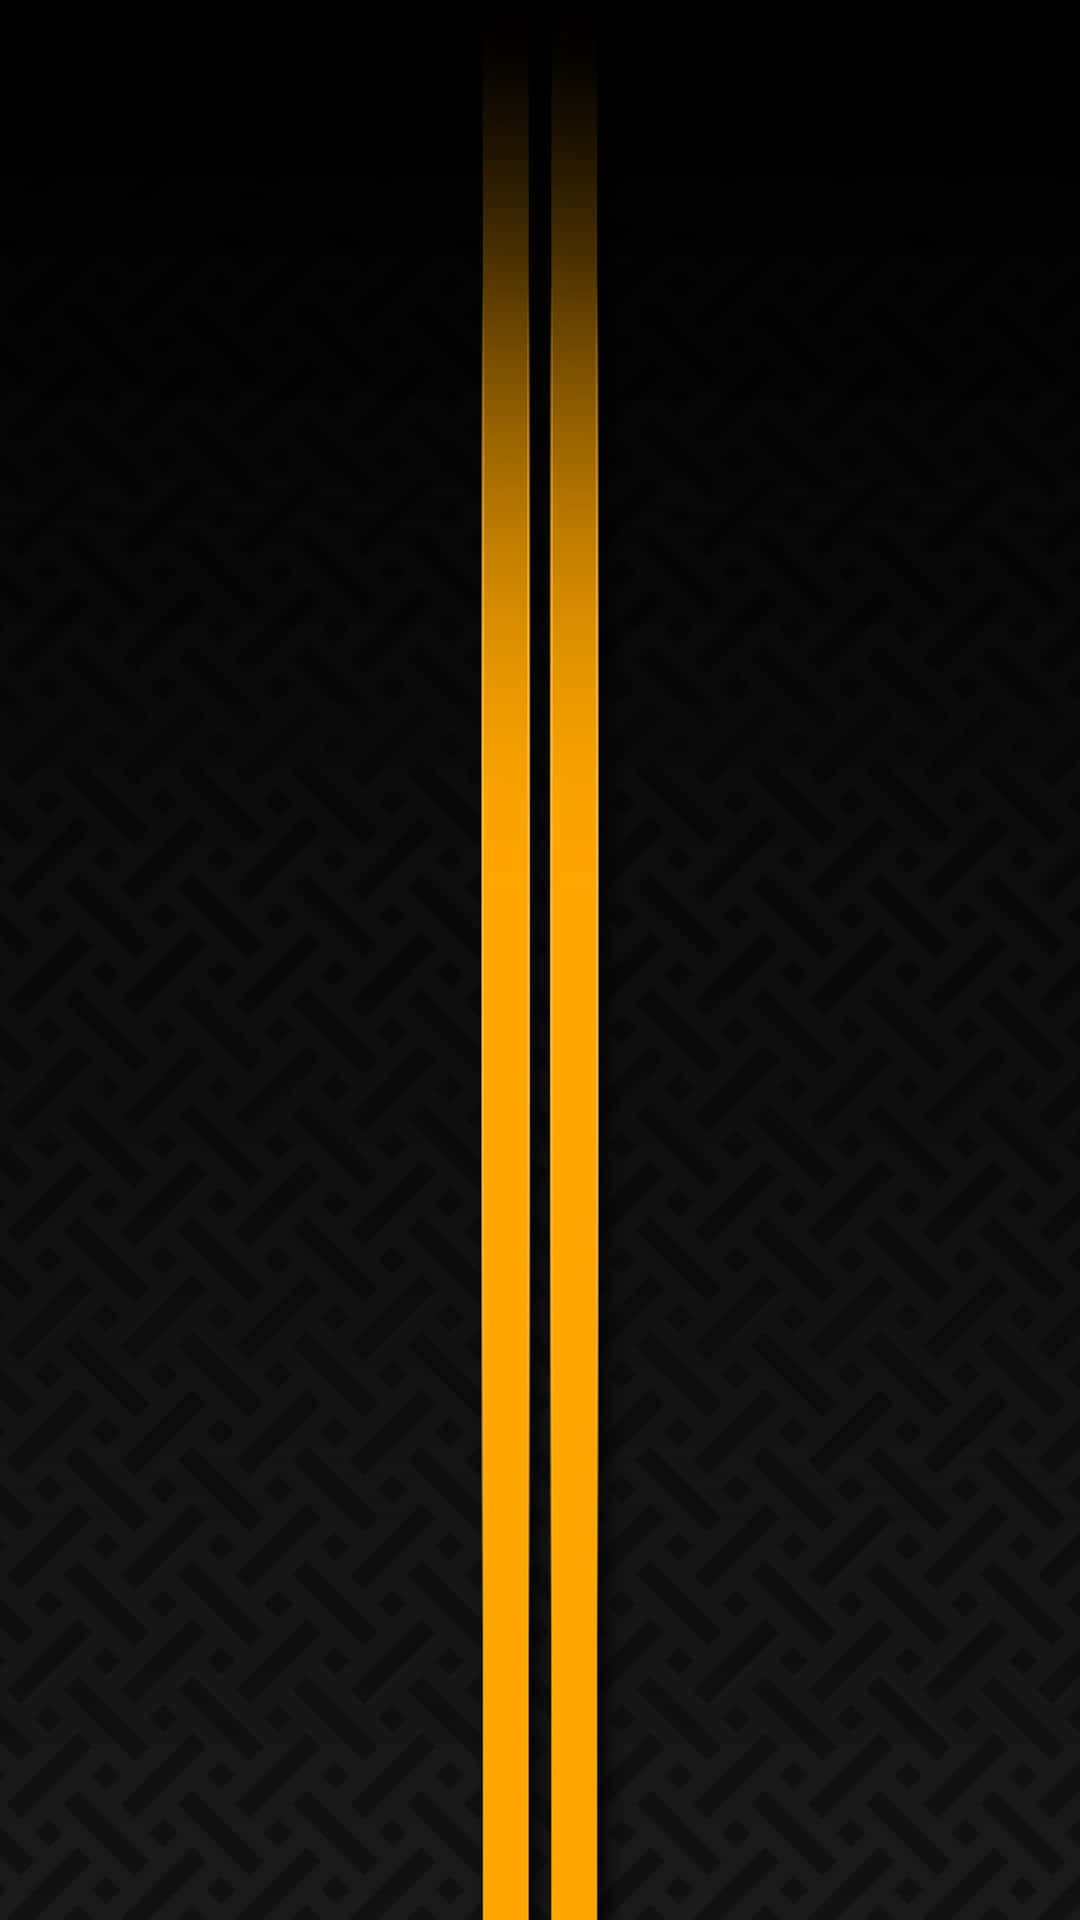 A Yellow And Black Road Line On A Black Background